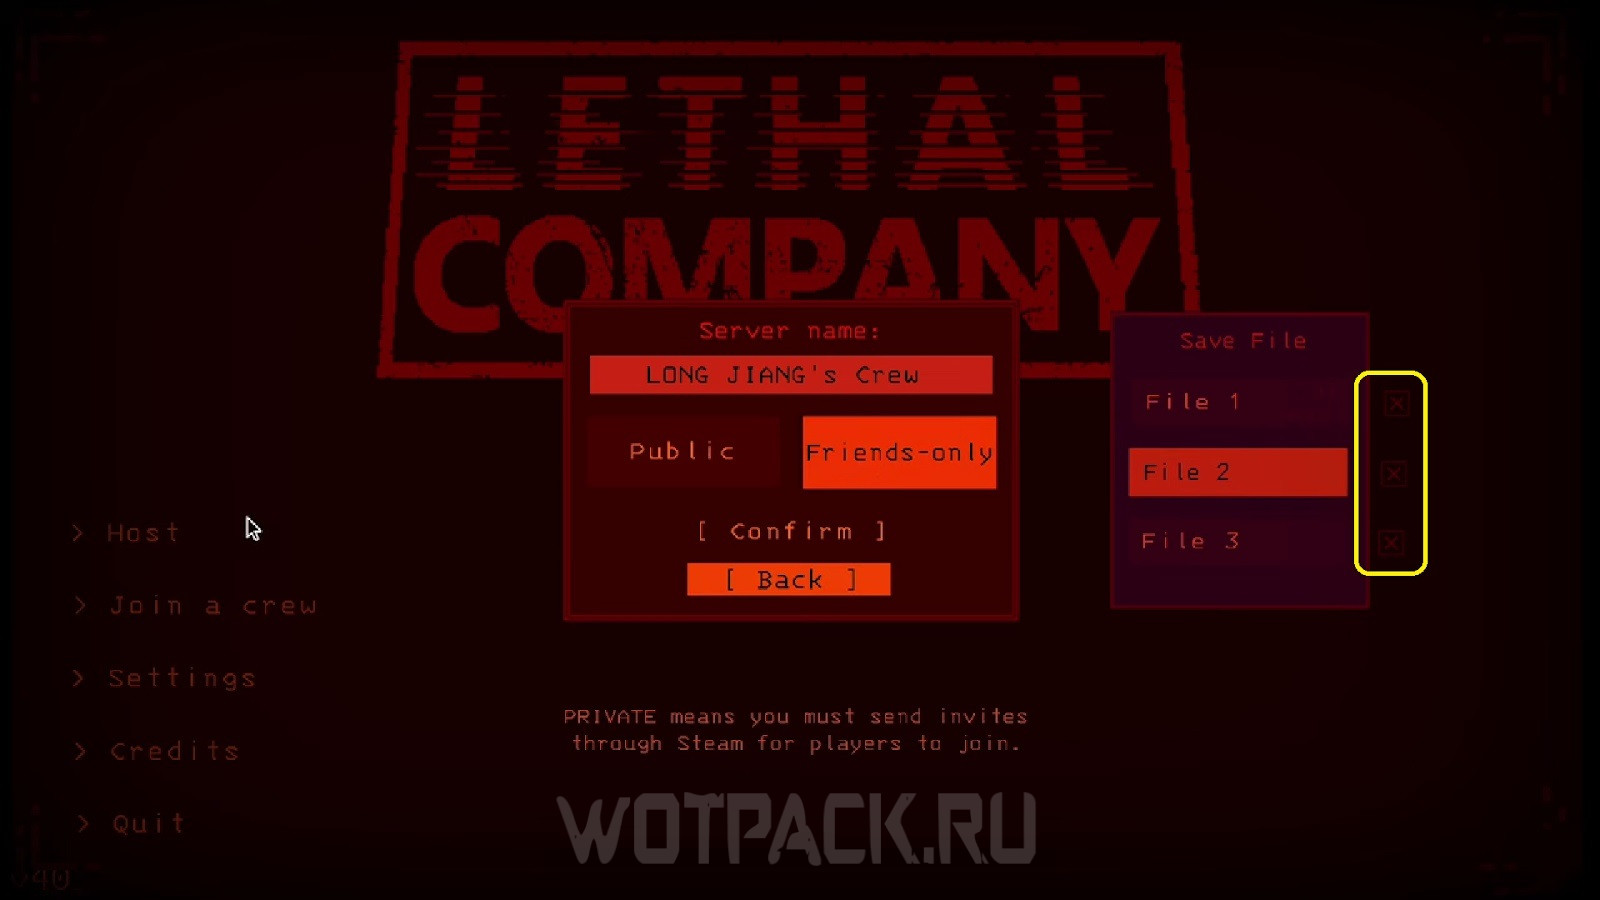 Lethal company items